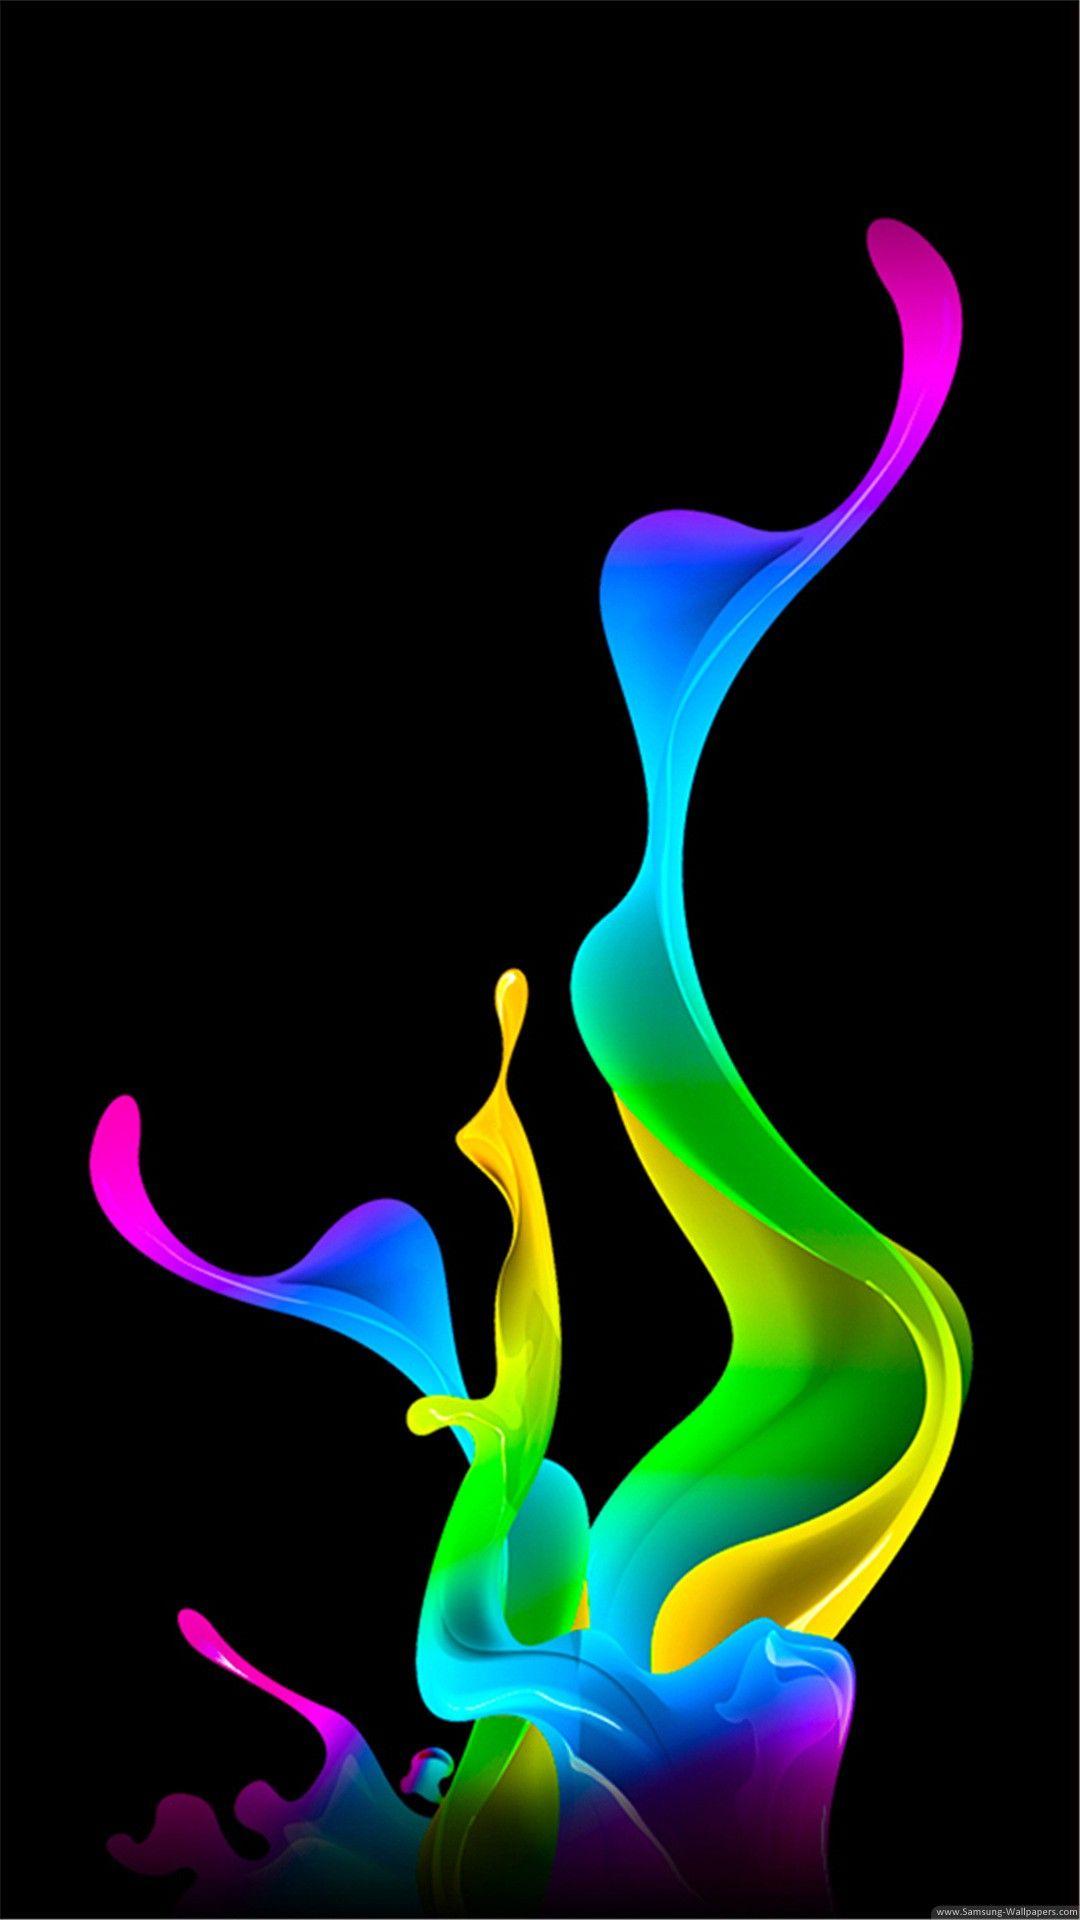 1080 x 1920 · jpeg - AMOLED Wallpapers | AMOLED Abstract Wallpaper in 2019 | Abstract ...